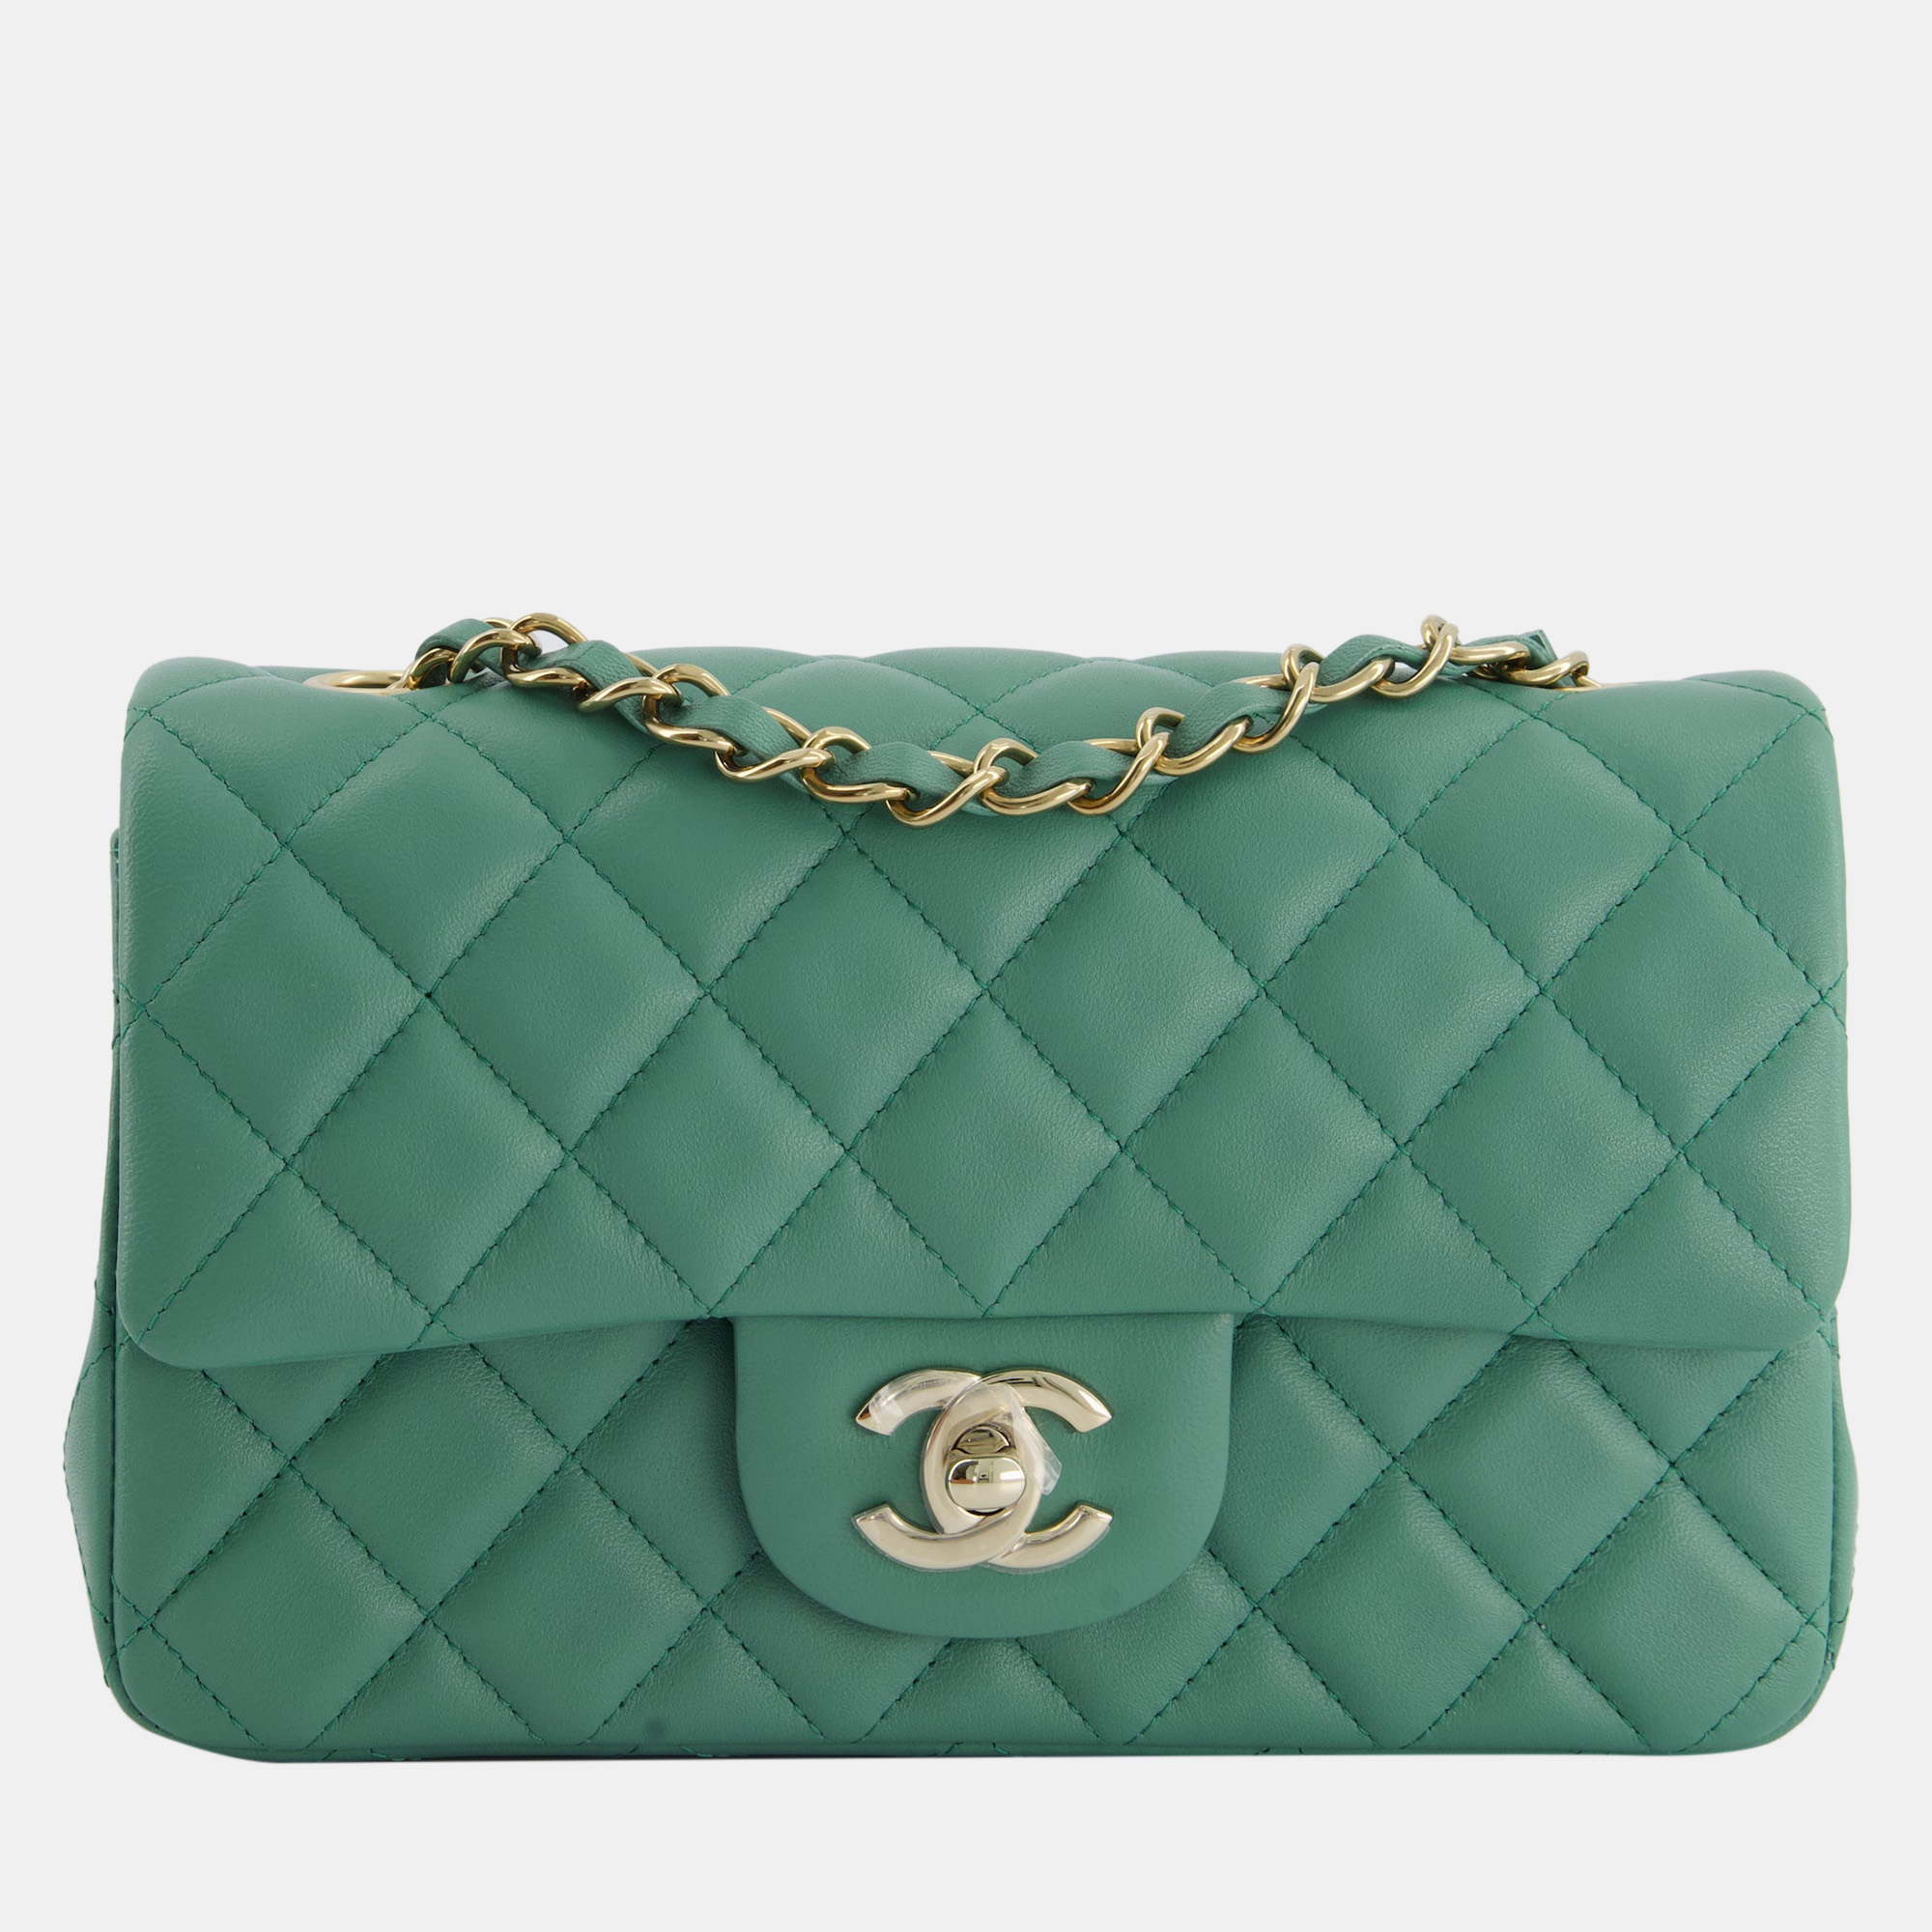 Chanel green mini rectangular bag in lambskin leather with  champagne gold hardware